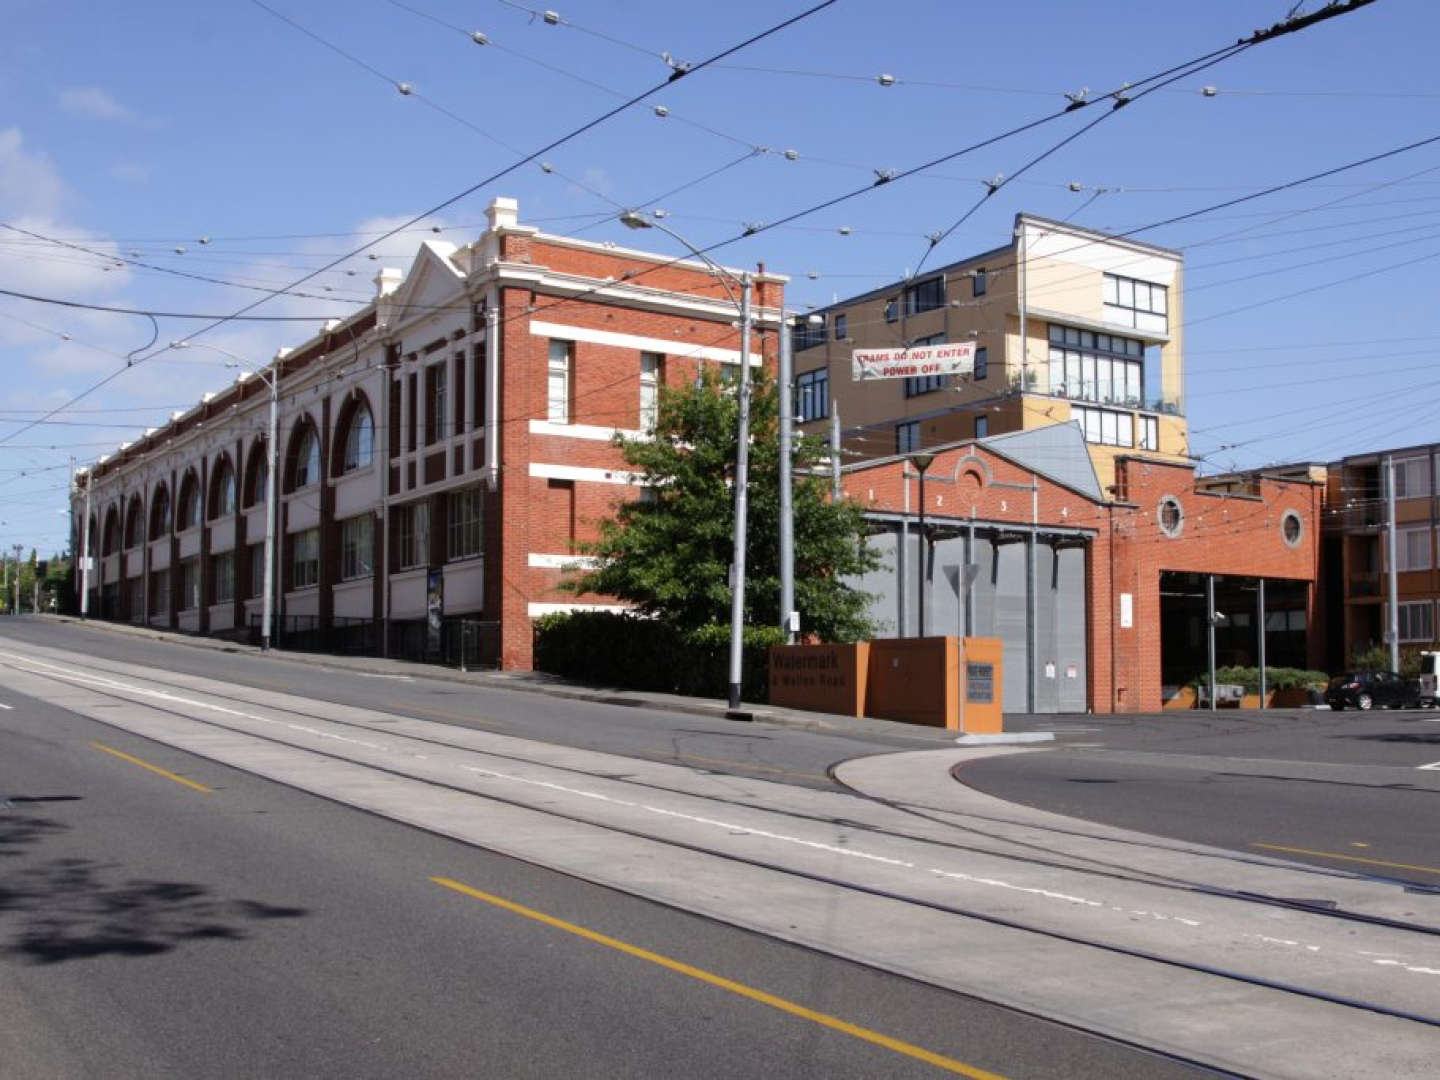 Looking up the hill at the former Hawthorn tram depot from the tram lines